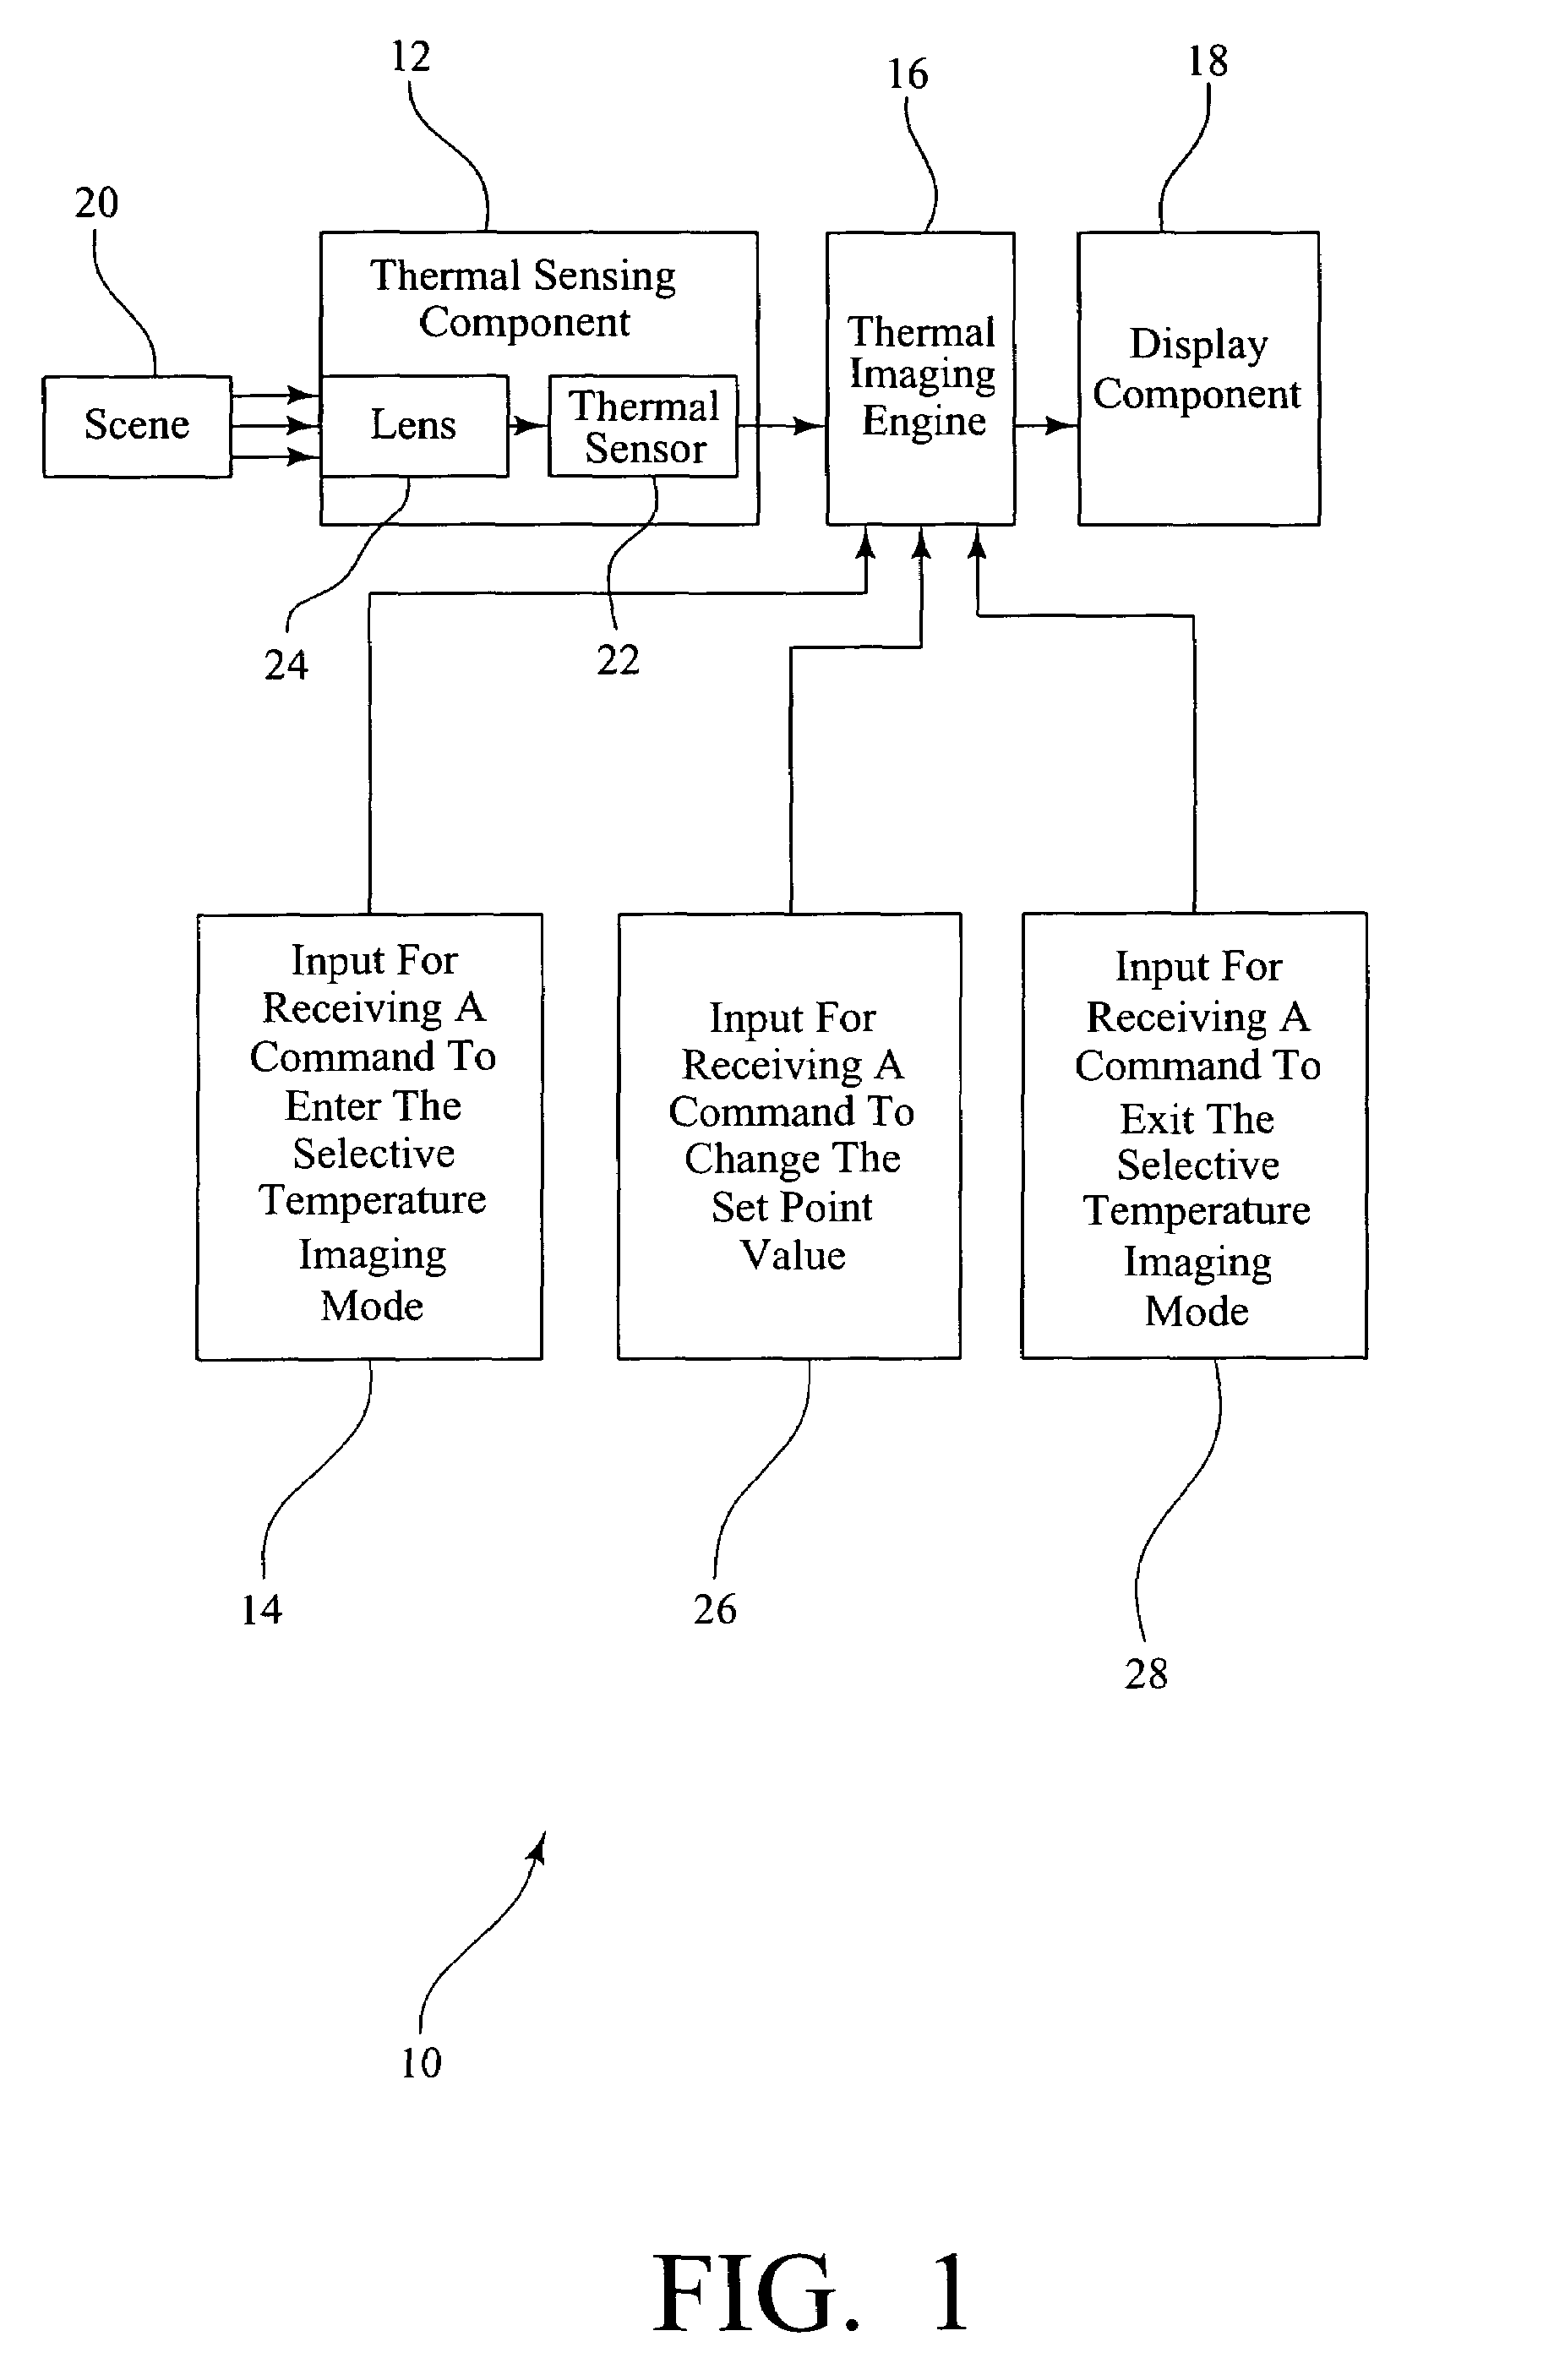 Method and system for thermal imaging having a selective temperature imaging mode